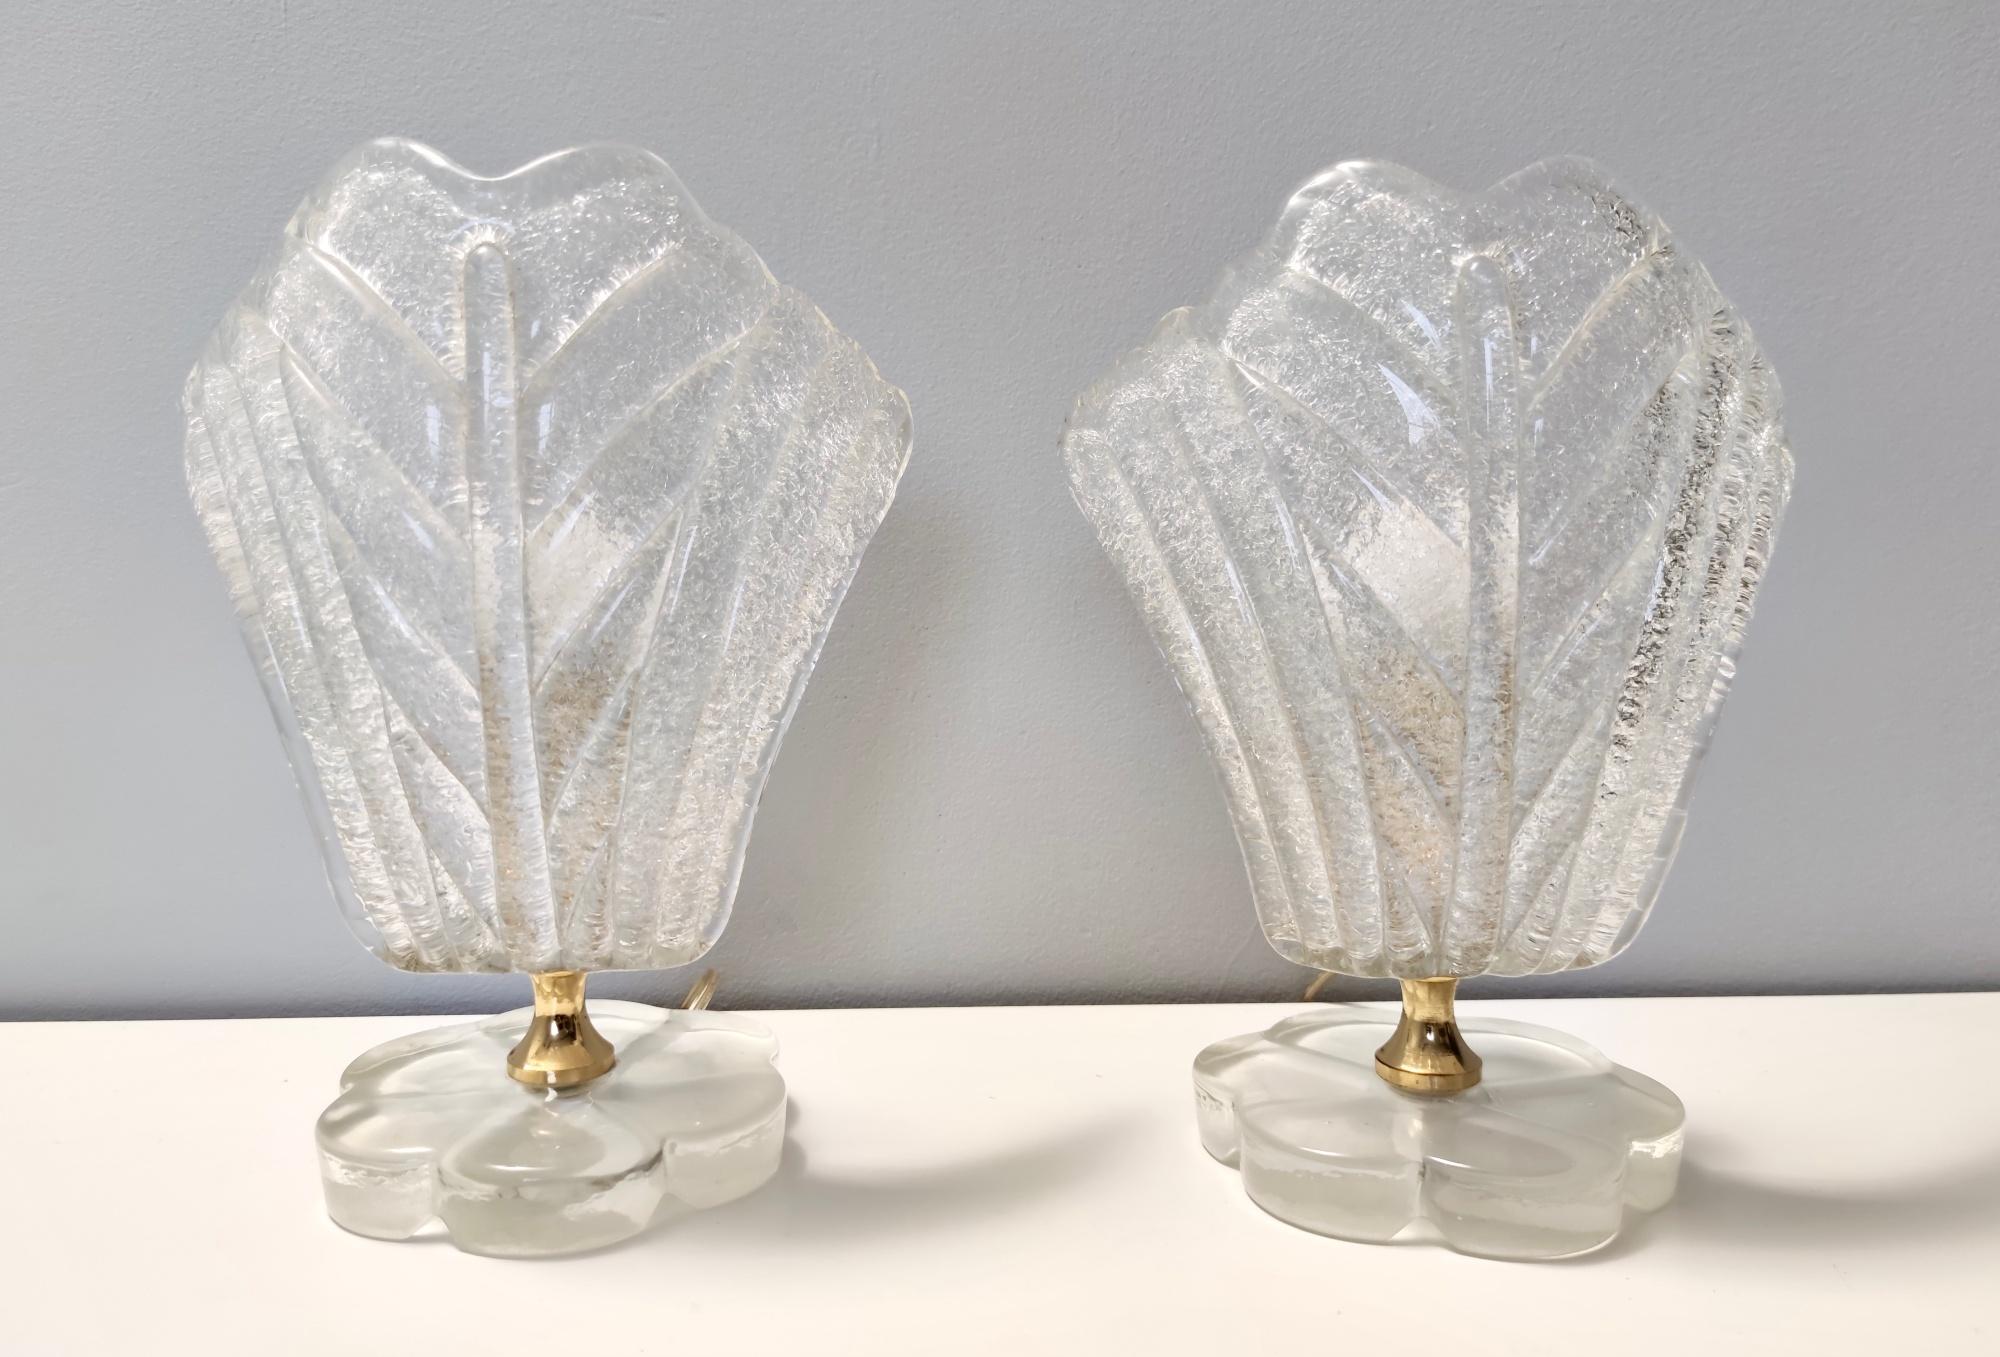 Italian Pair of Vintage Revolving Murano Glass Table Lamps Ascribable to Barovier, Italy